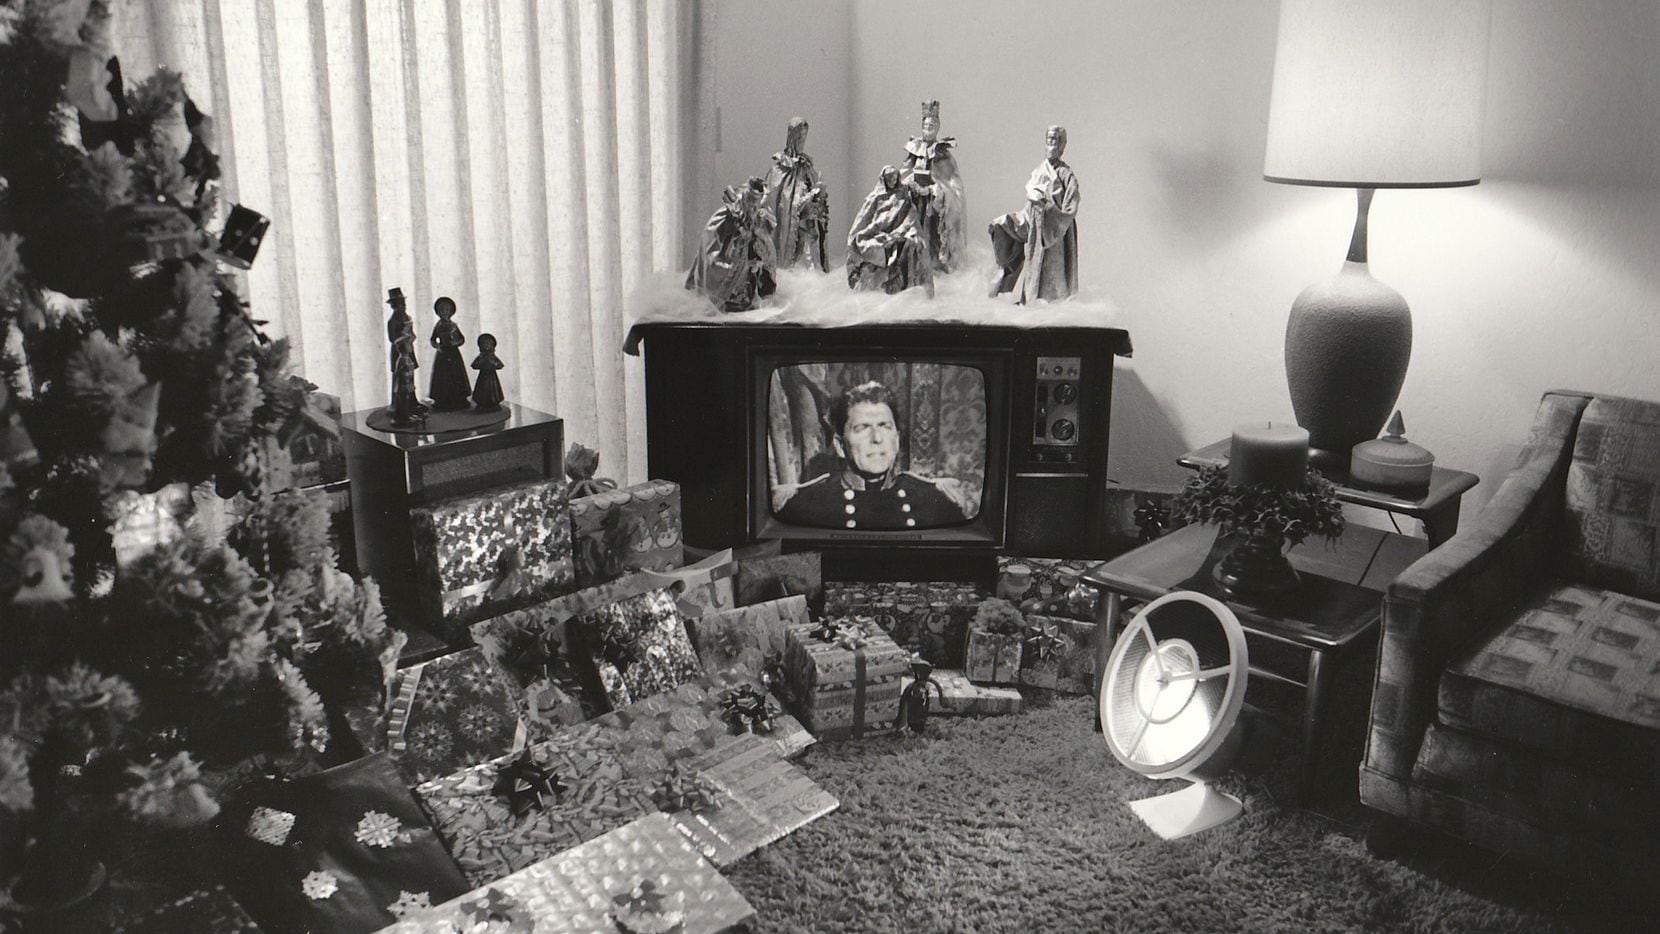 Bill Owens' "Reagan on TV" is on display as part of the "Suburbia" exhibition at Photographs Do Not Bend Gallery through Feb. 12.  (Courtesy of PDNB Gallery, Dallas)